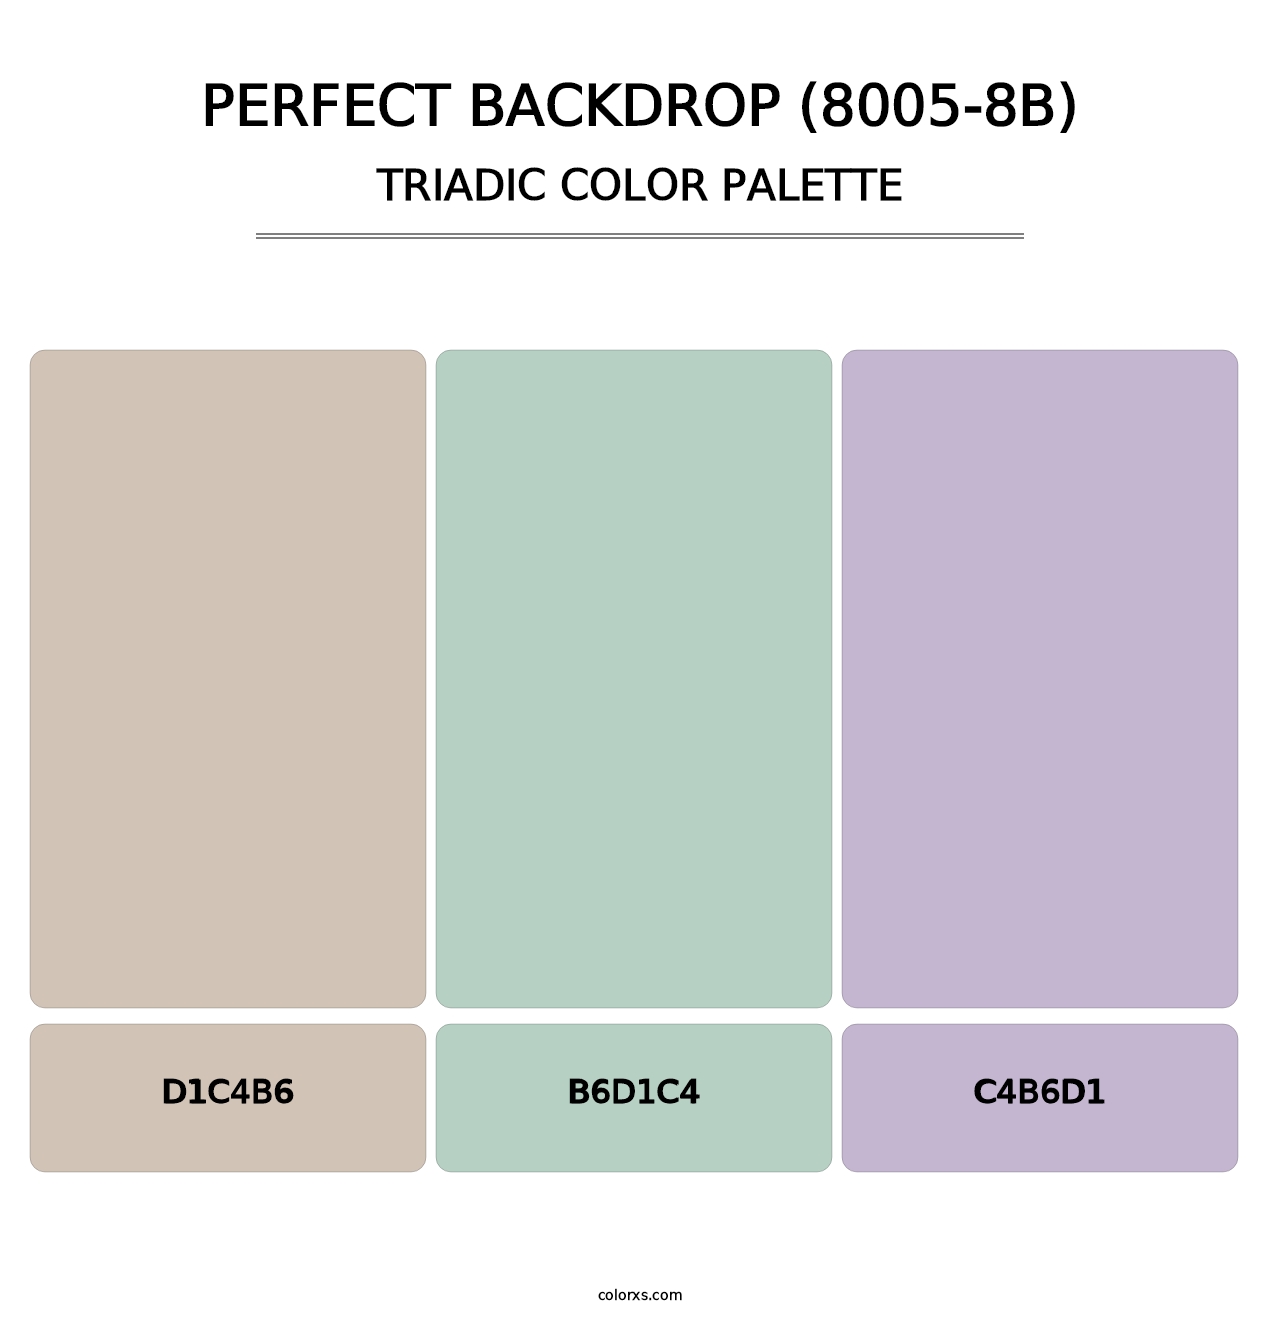 Perfect Backdrop (8005-8B) - Triadic Color Palette